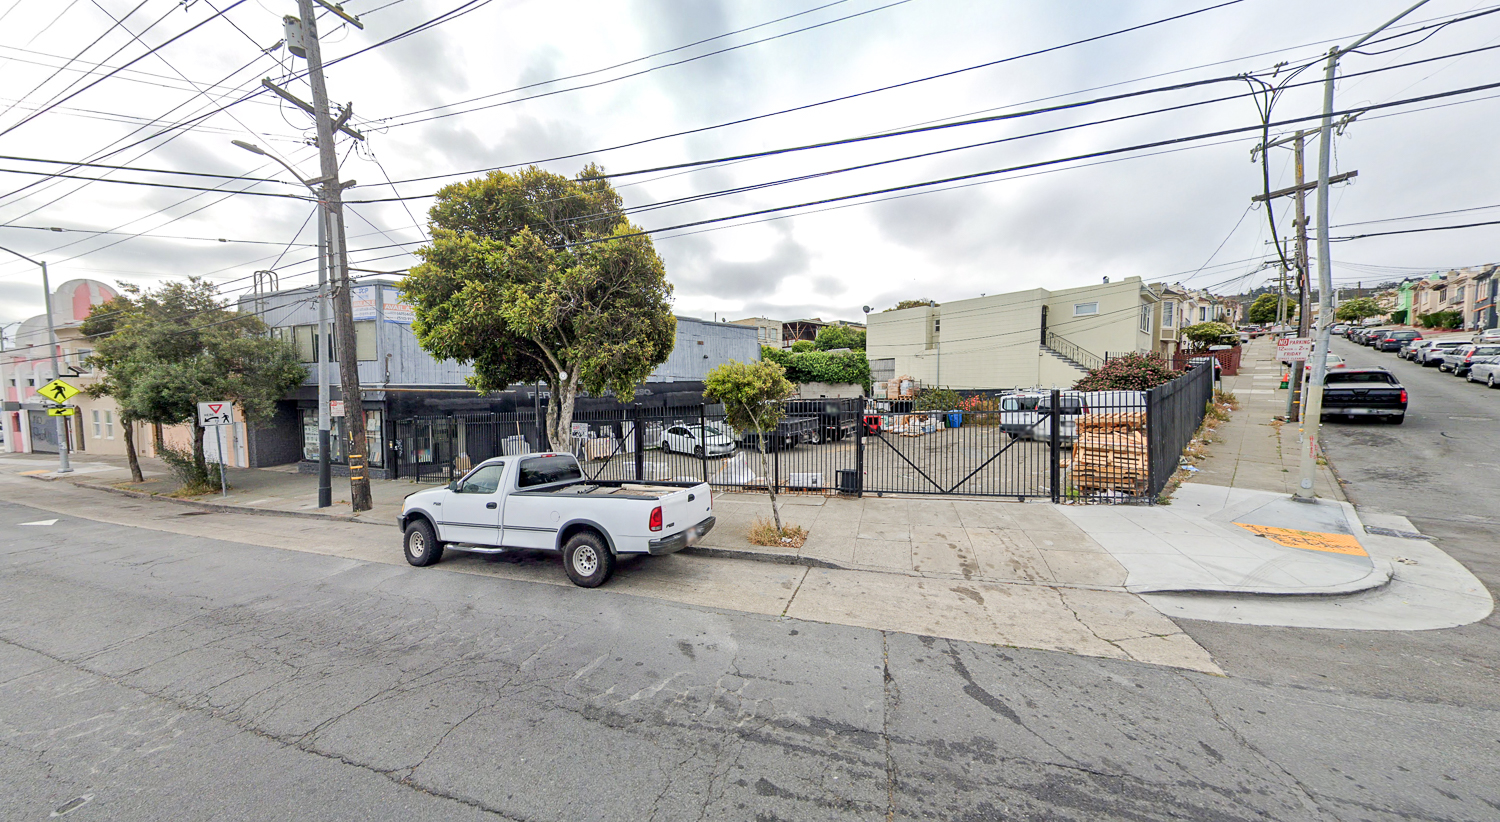 5425 Mission Street existing condition, image via Google Street View